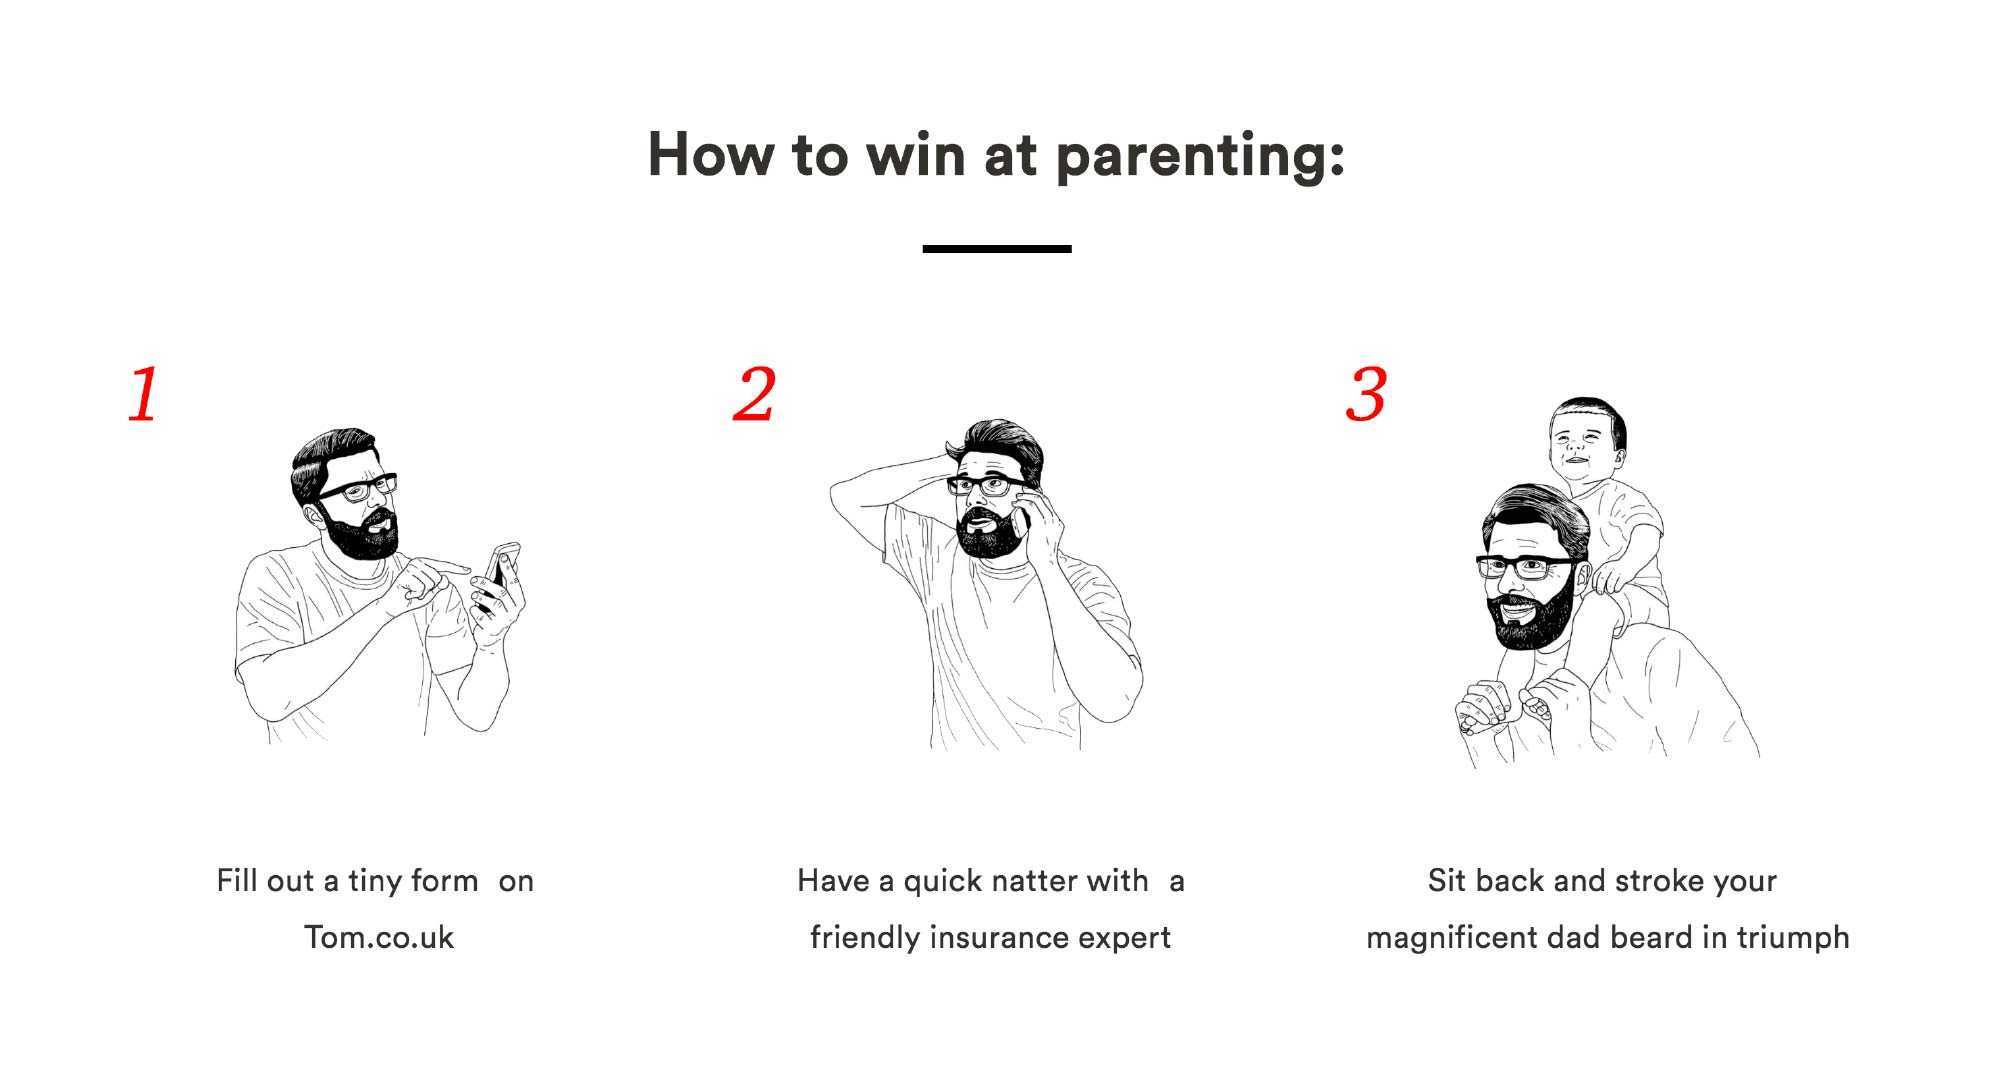 Tom how to win at parenting